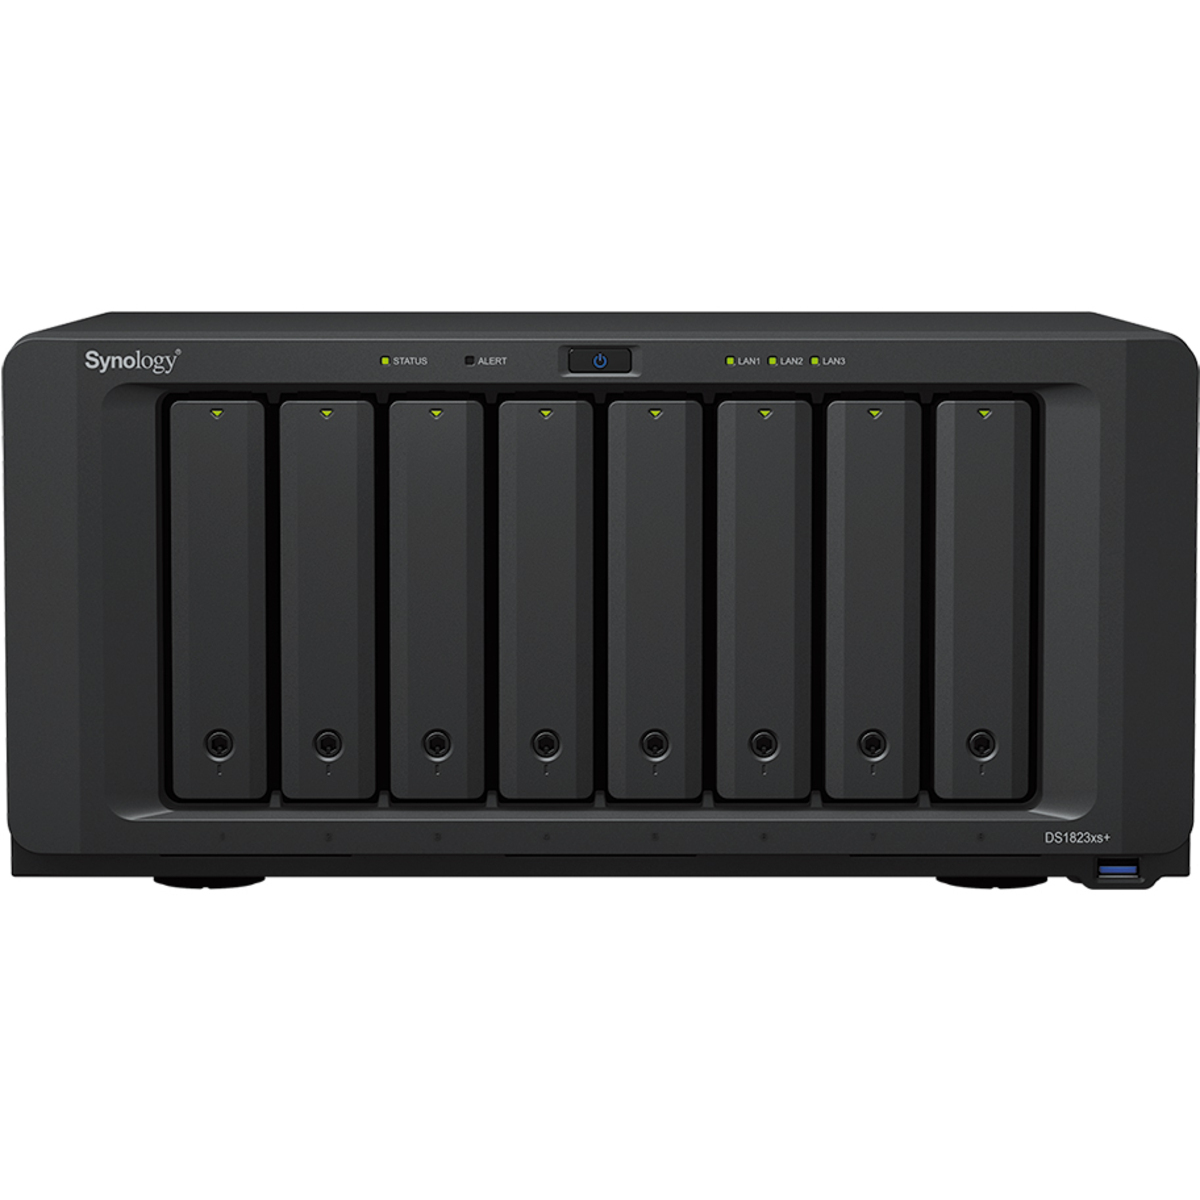 Synology DiskStation DS1823xs+ 20tb 8-Bay Desktop Multimedia / Power User / Business NAS - Network Attached Storage Device 5x4tb Seagate IronWolf Pro ST4000NE001 3.5 7200rpm SATA 6Gb/s HDD NAS Class Drives Installed - Burn-In Tested DiskStation DS1823xs+